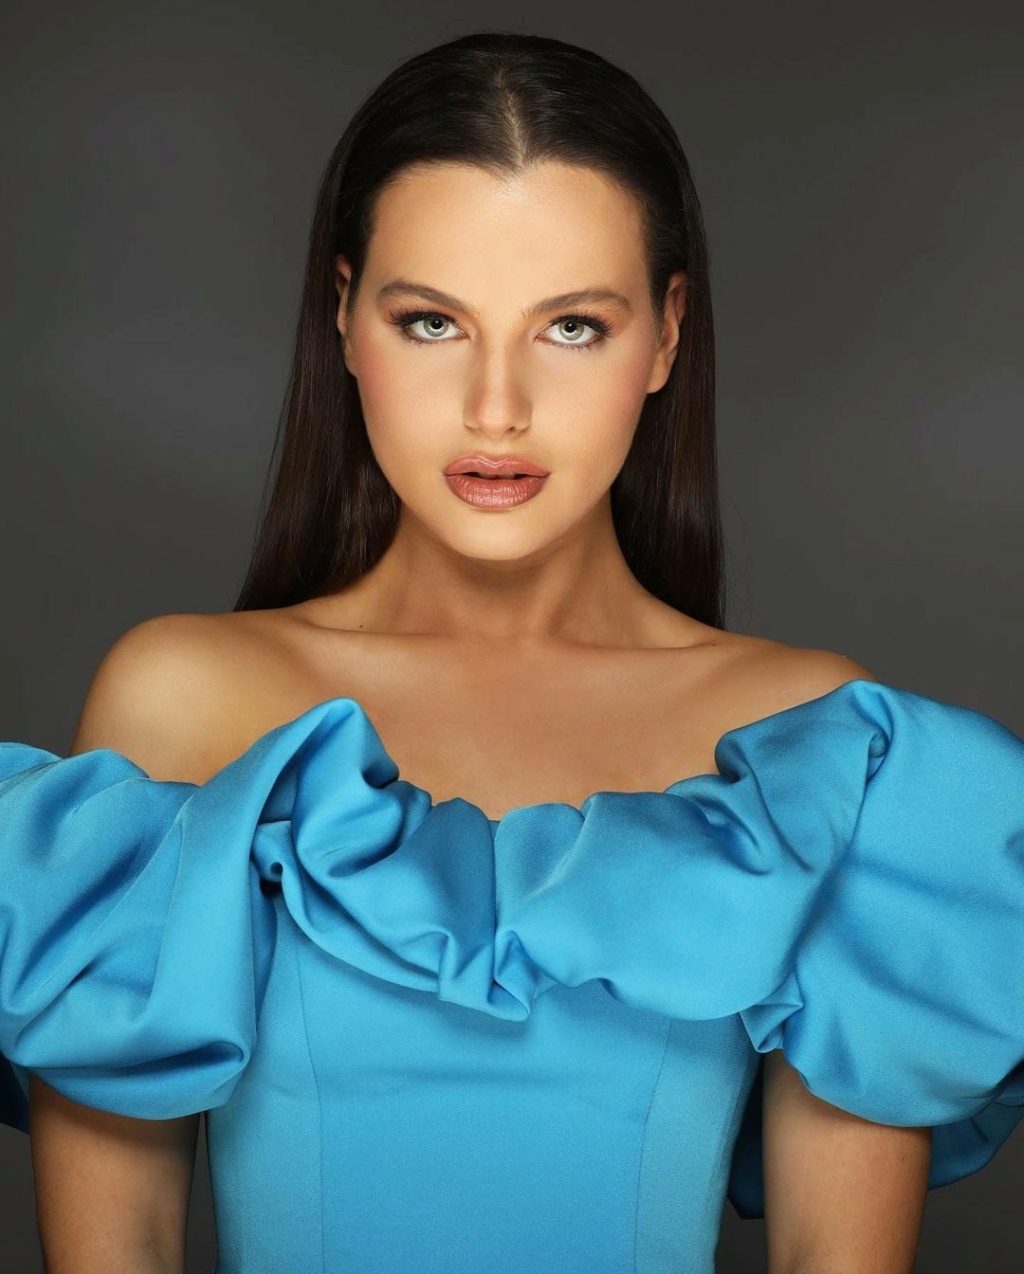 MISS WORLD 2021: OFFICIAL PORTRAITS 26601311